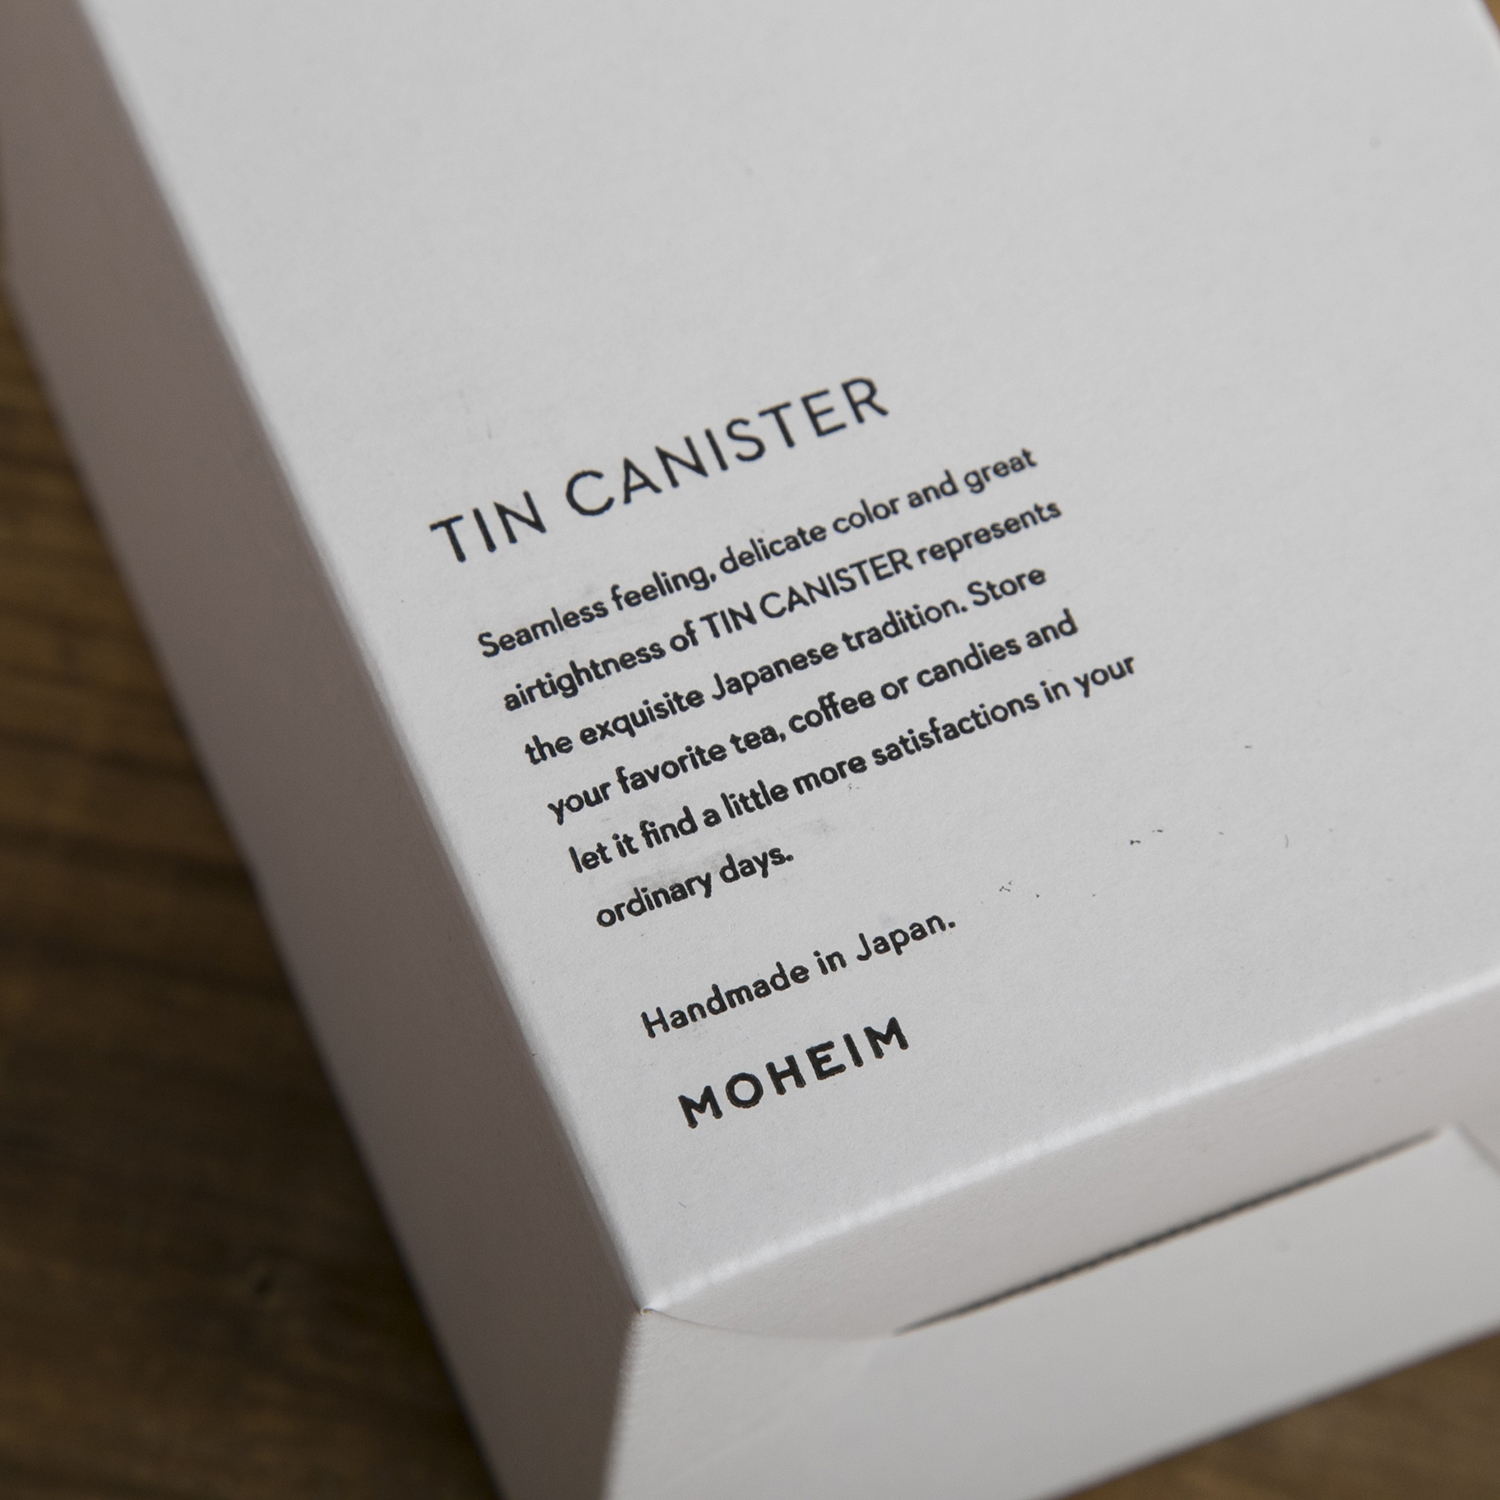 MOHEIM/TIN CANISTER L